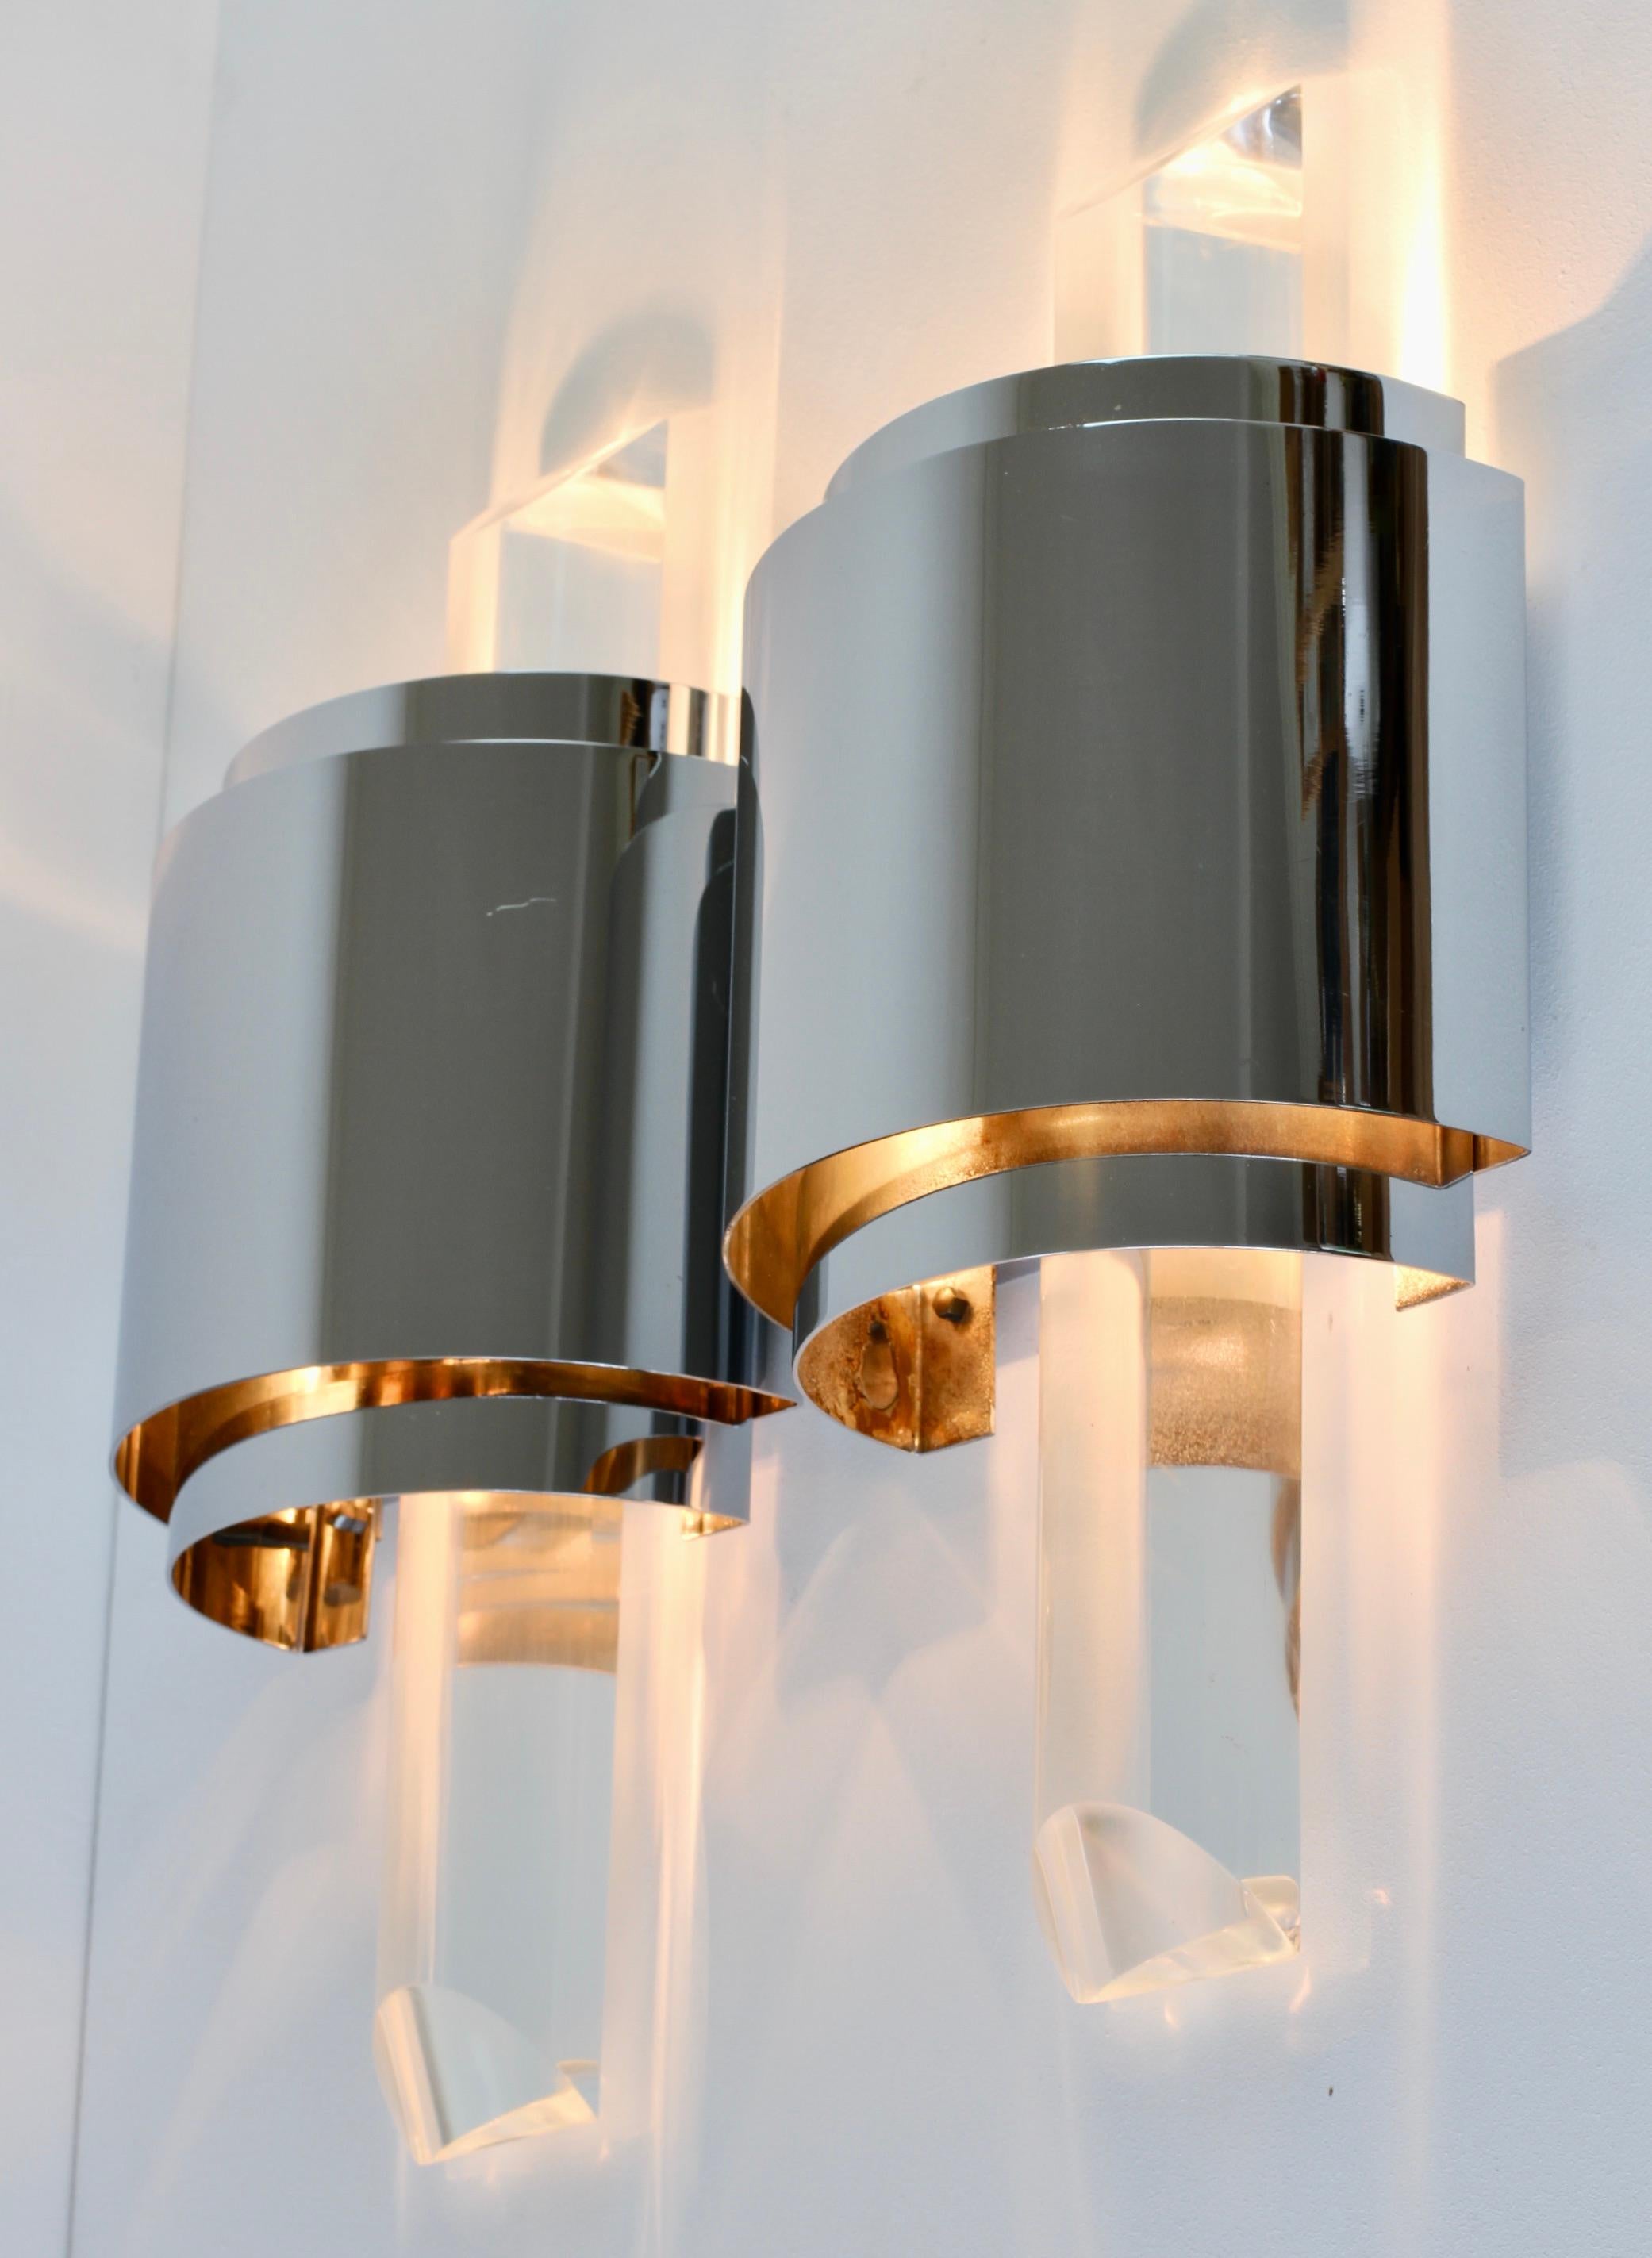 Large Hollywood Regency Lucite and Chrome Wall Lights or Sconces, circa 1970s For Sale 2